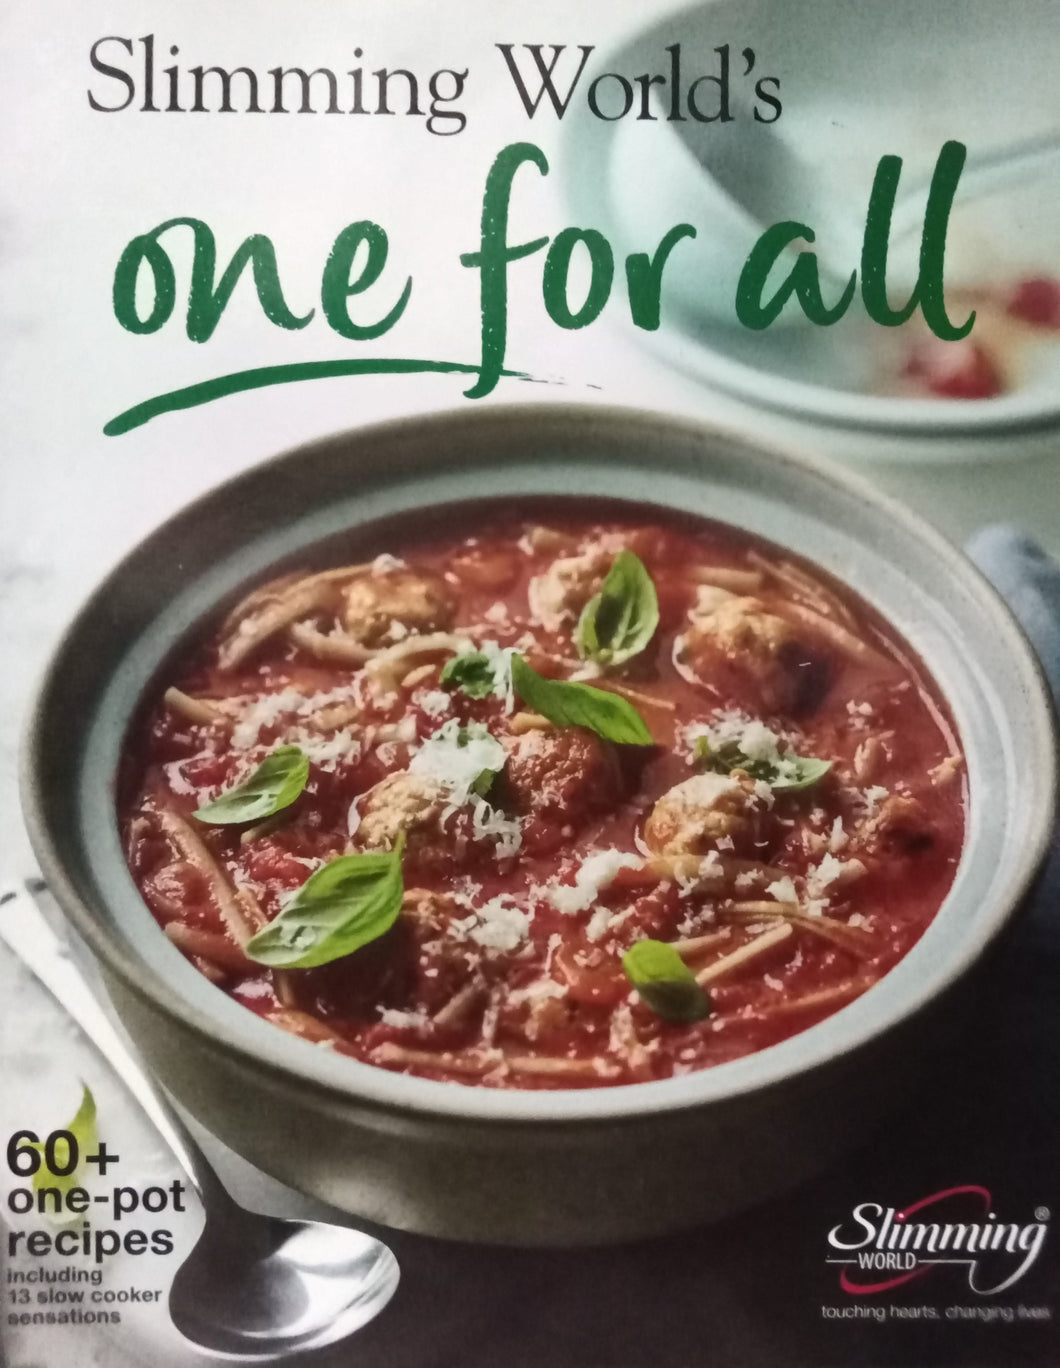 Slimming World's One For All